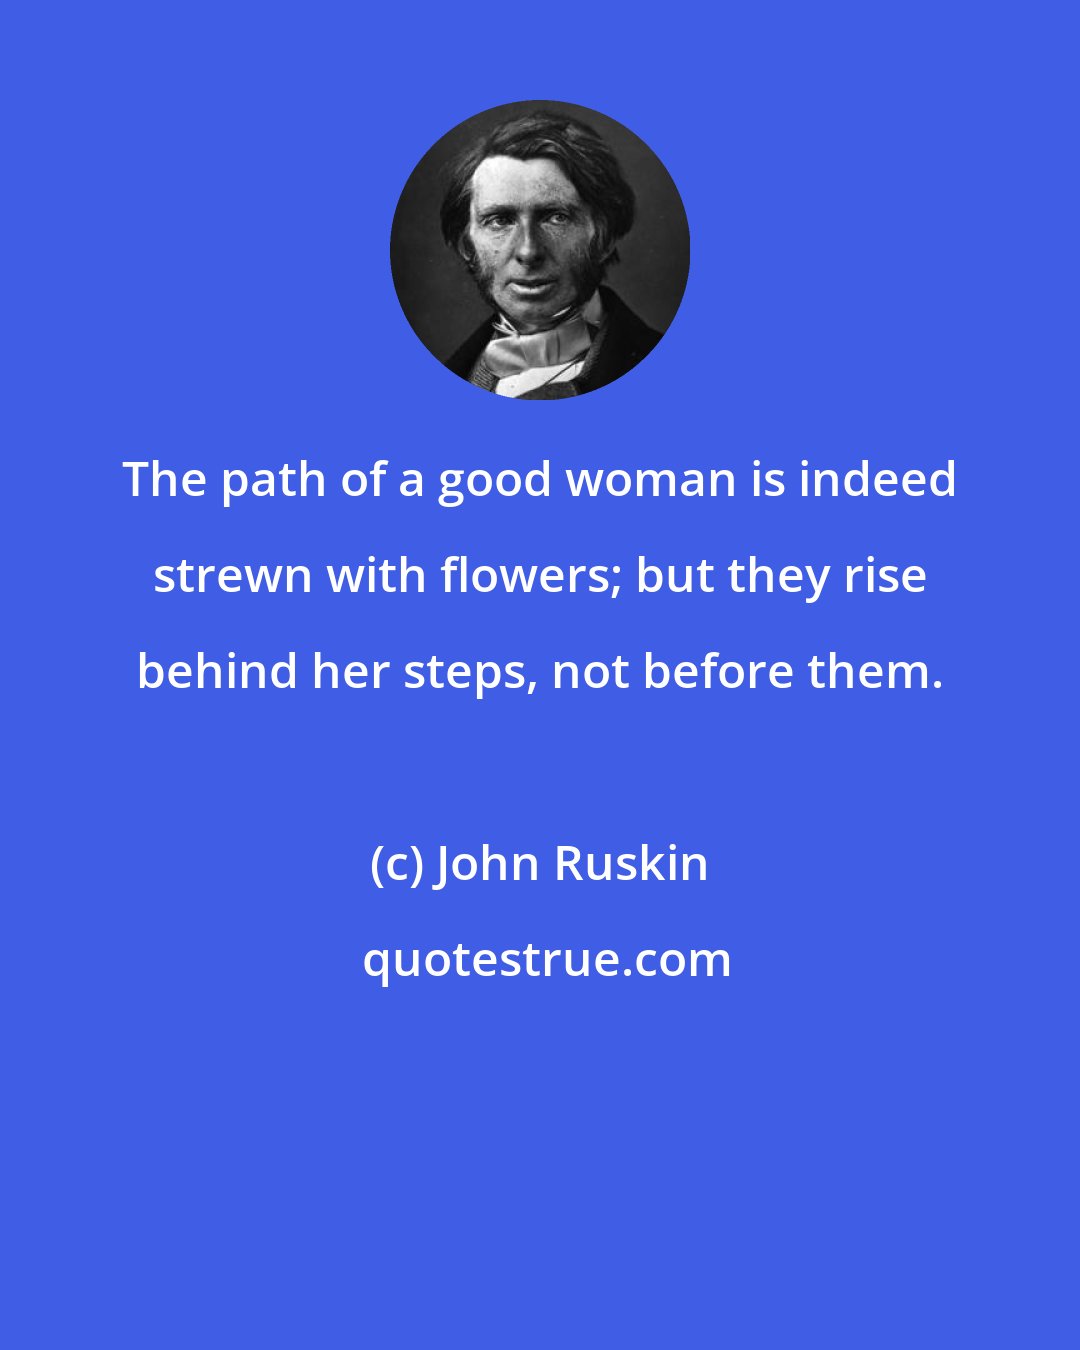 John Ruskin: The path of a good woman is indeed strewn with flowers; but they rise behind her steps, not before them.